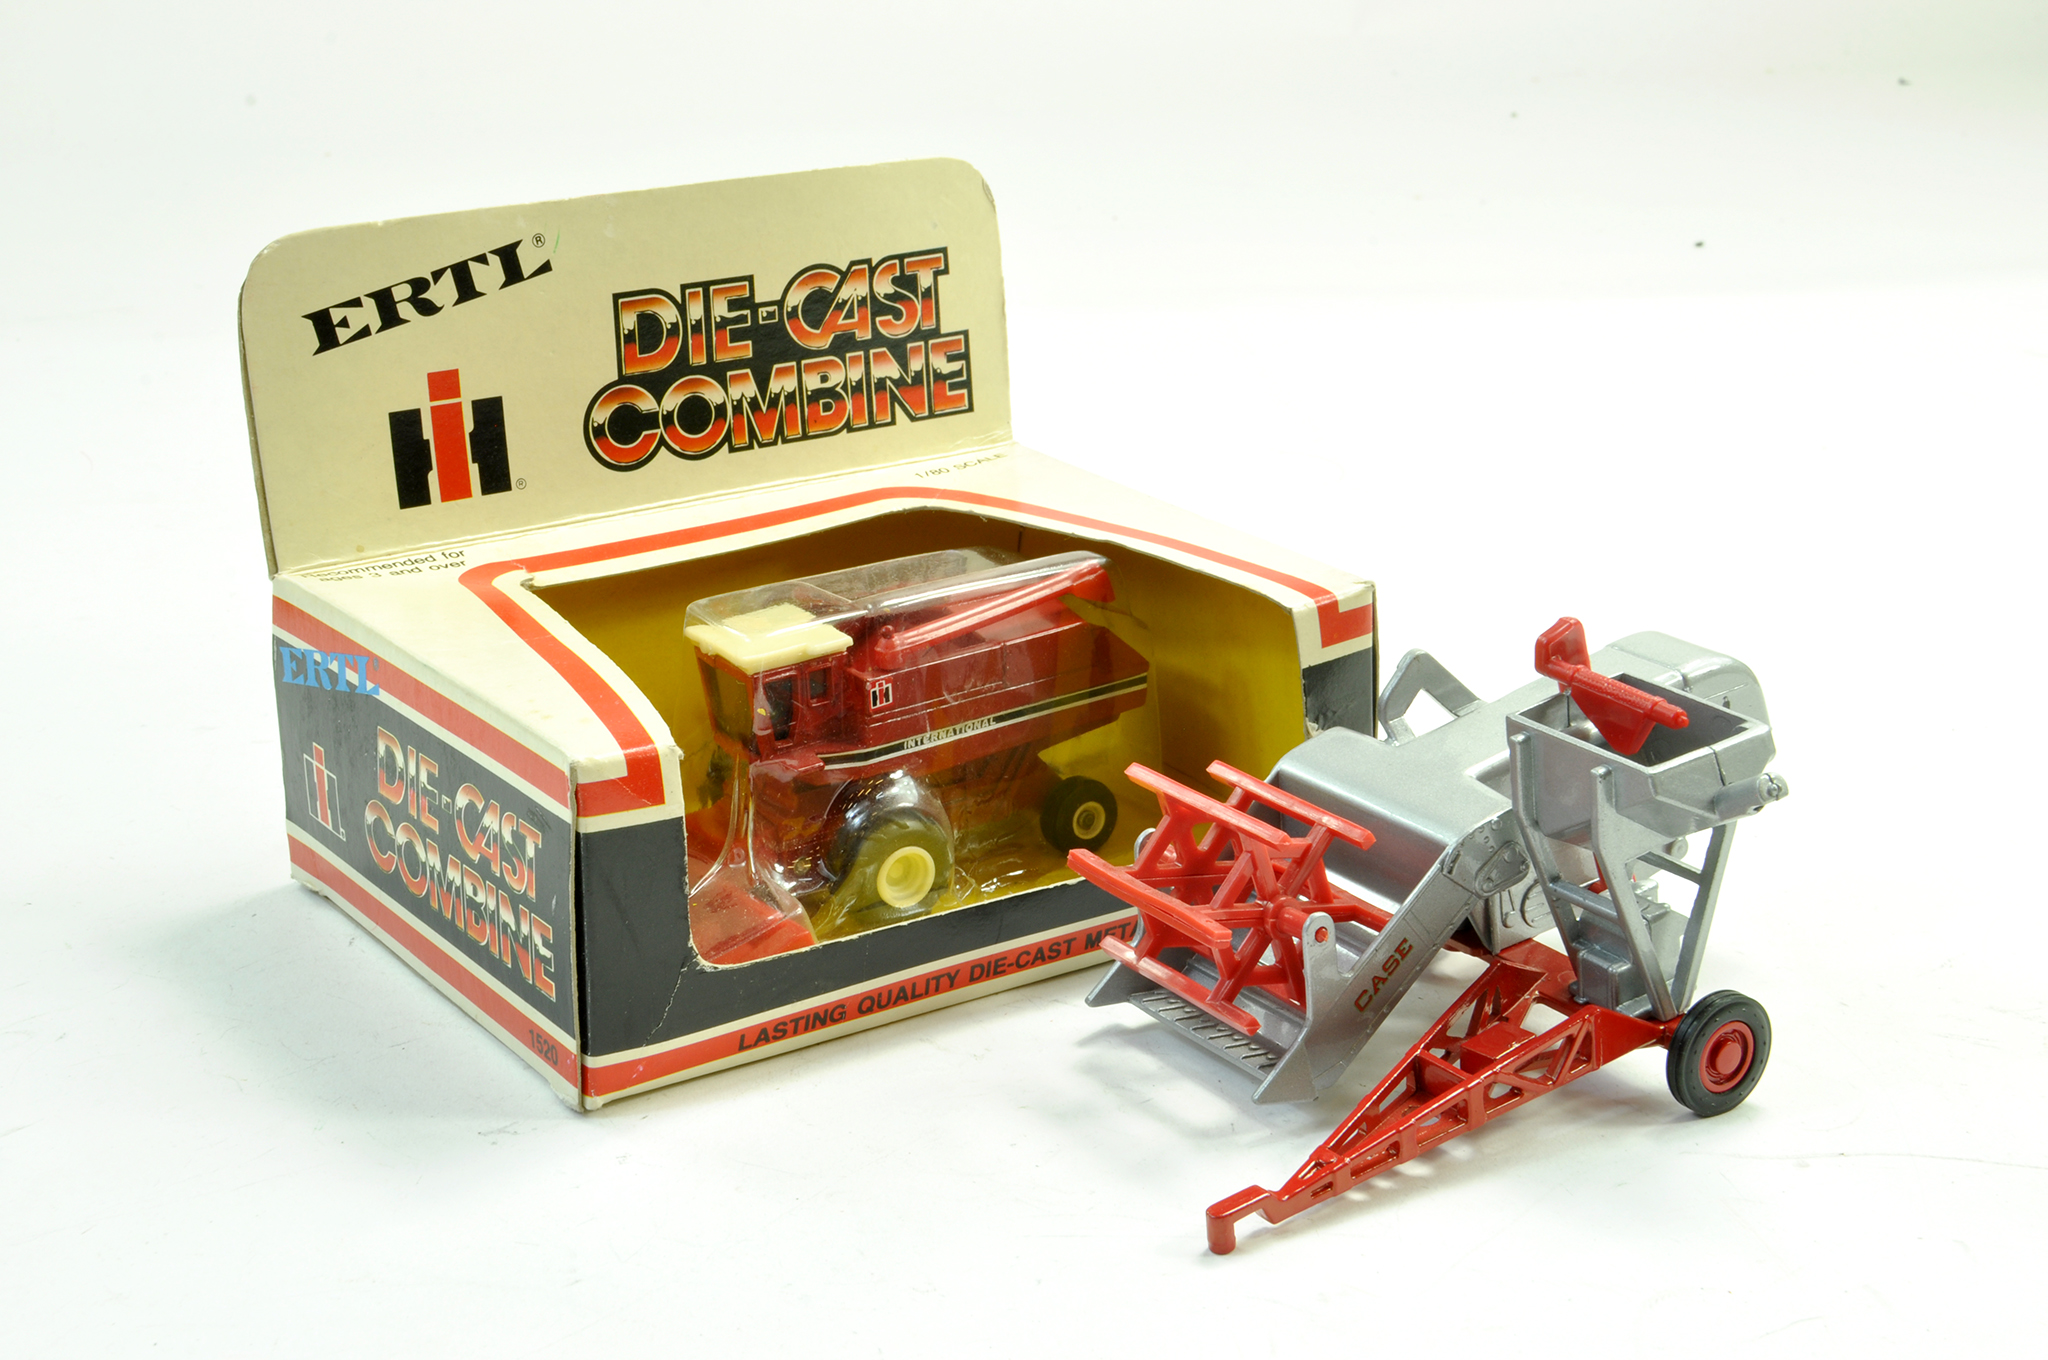 Ertl 1/64 International Combine plus 1/43 Trailed Case issue. Generally excellent, one boxed.